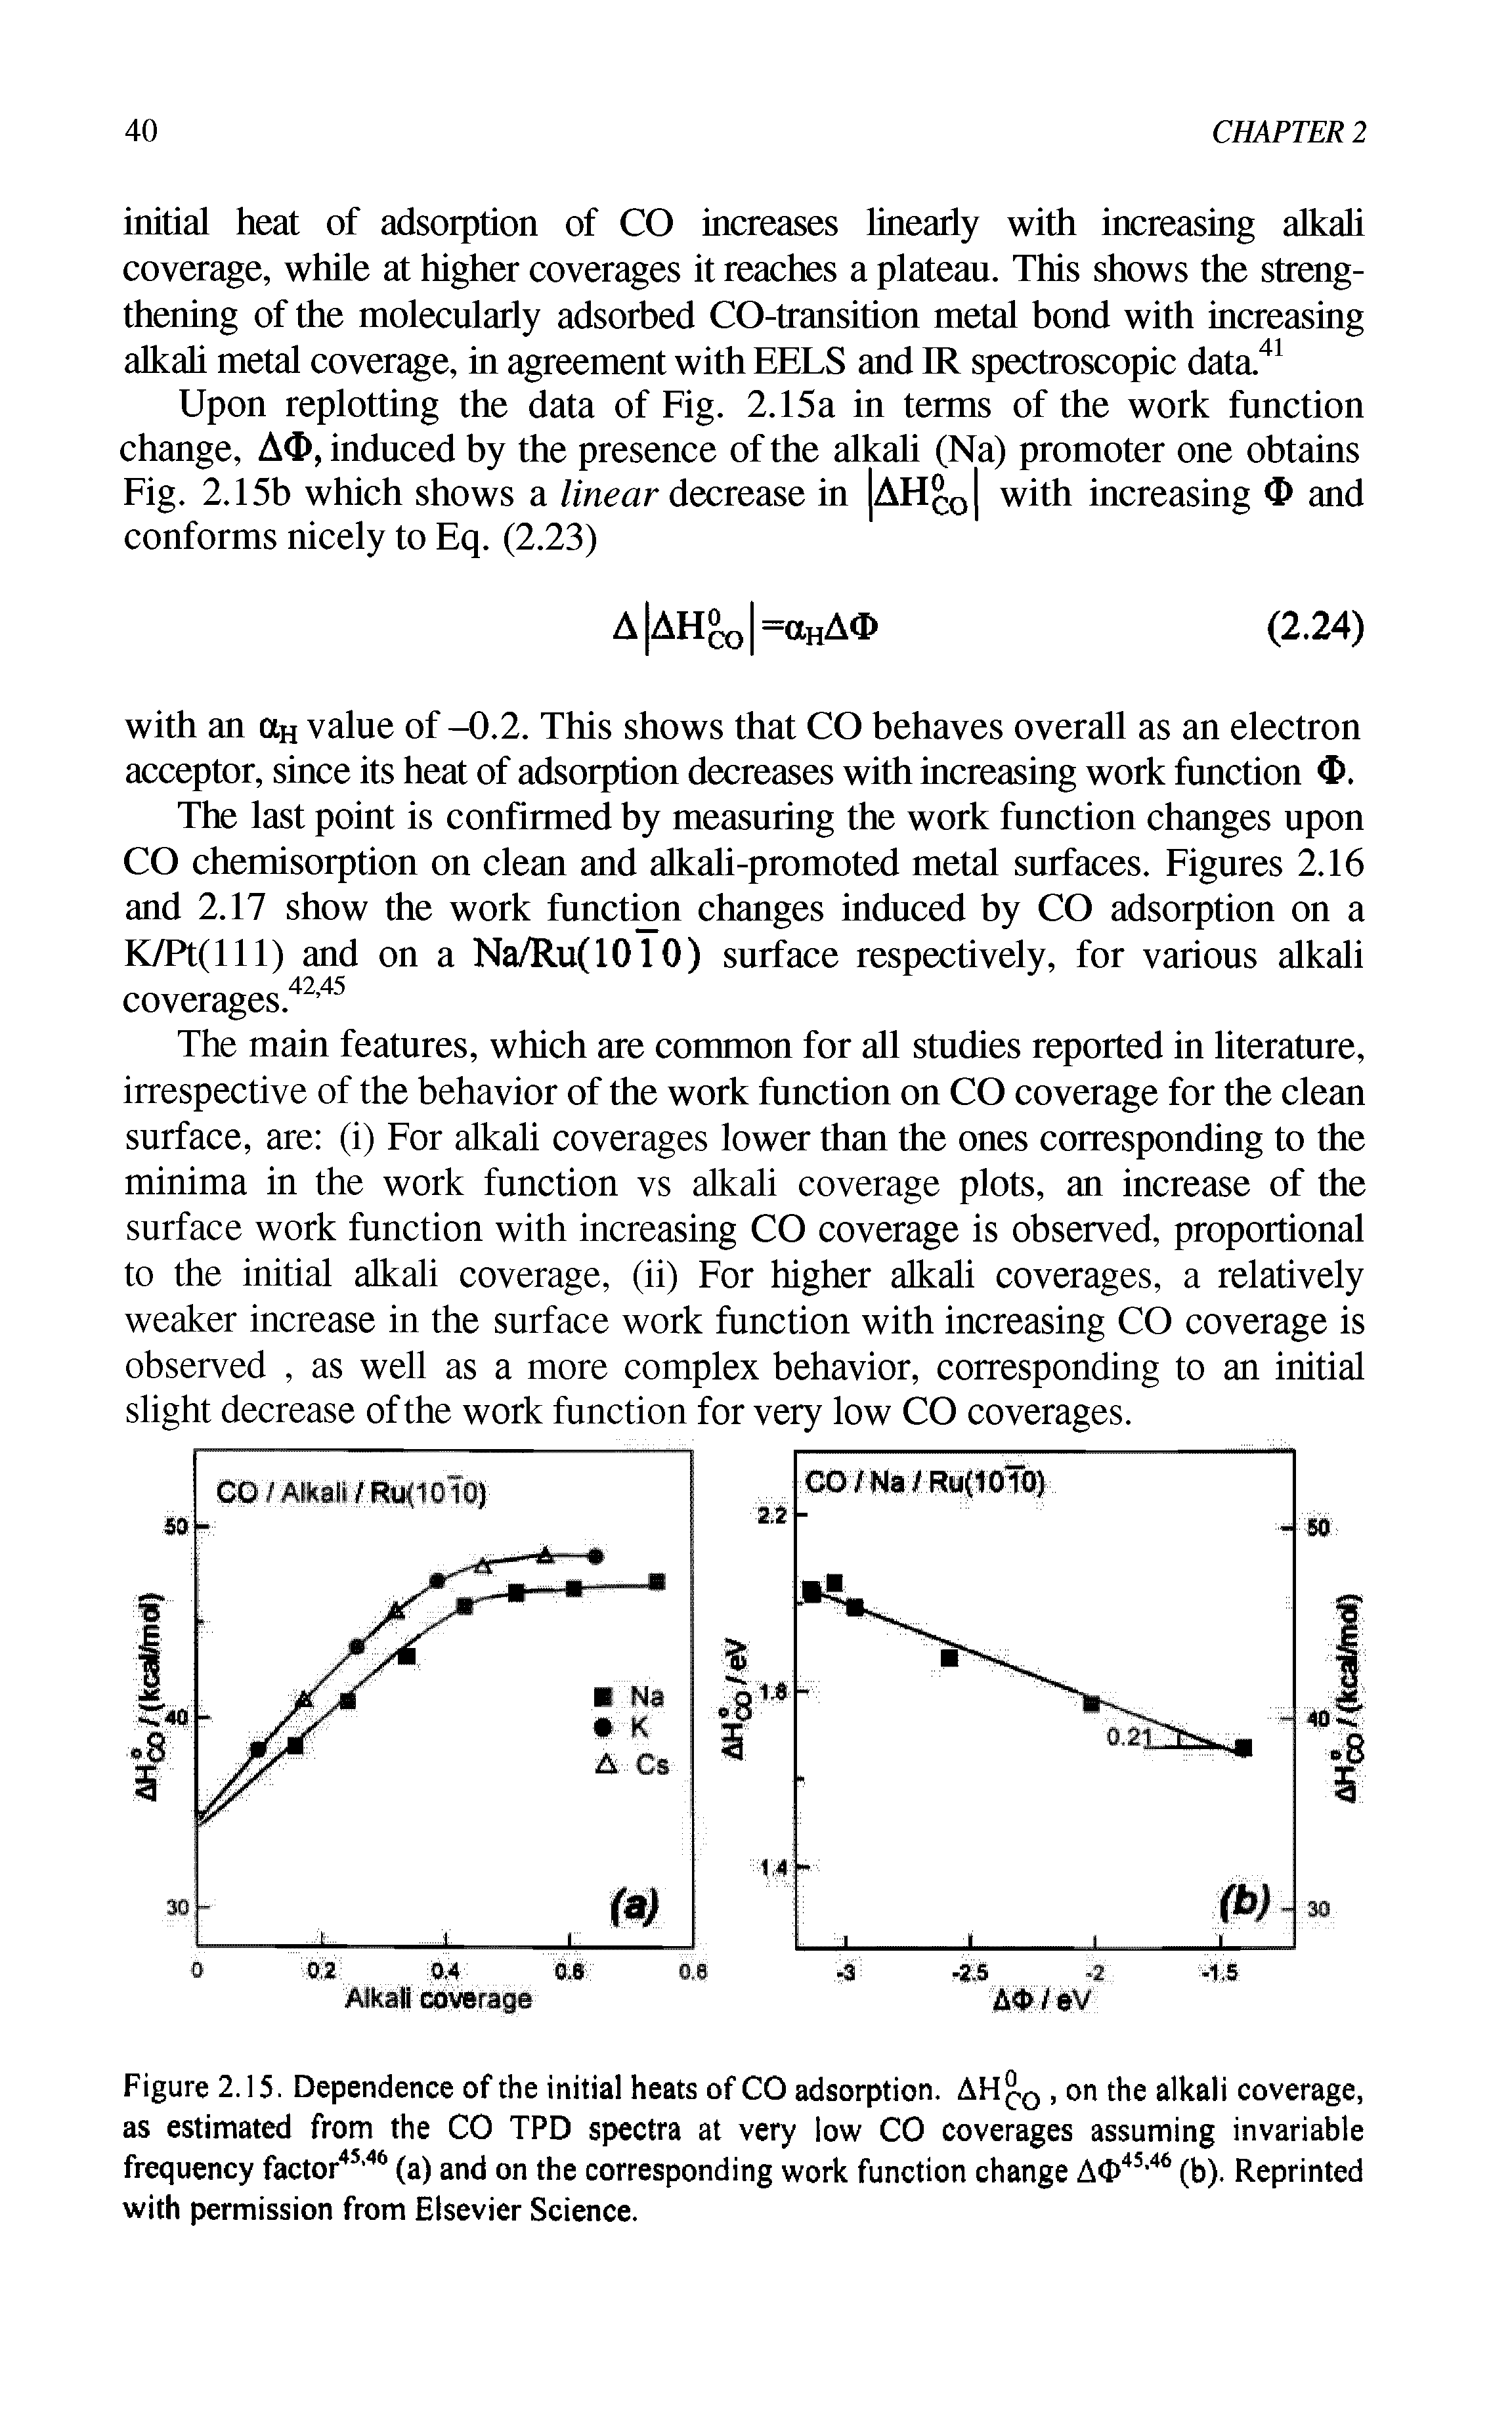 Figure 2.15. Dependence of the initial heats of CO adsorption. AH 0, on the alkali coverage, as estimated from the CO TPD spectra at very low CO coverages assuming invariable frequency factor45,46 (a) and on the corresponding work function change AO45,46 (b). Reprinted with permission from Elsevier Science.